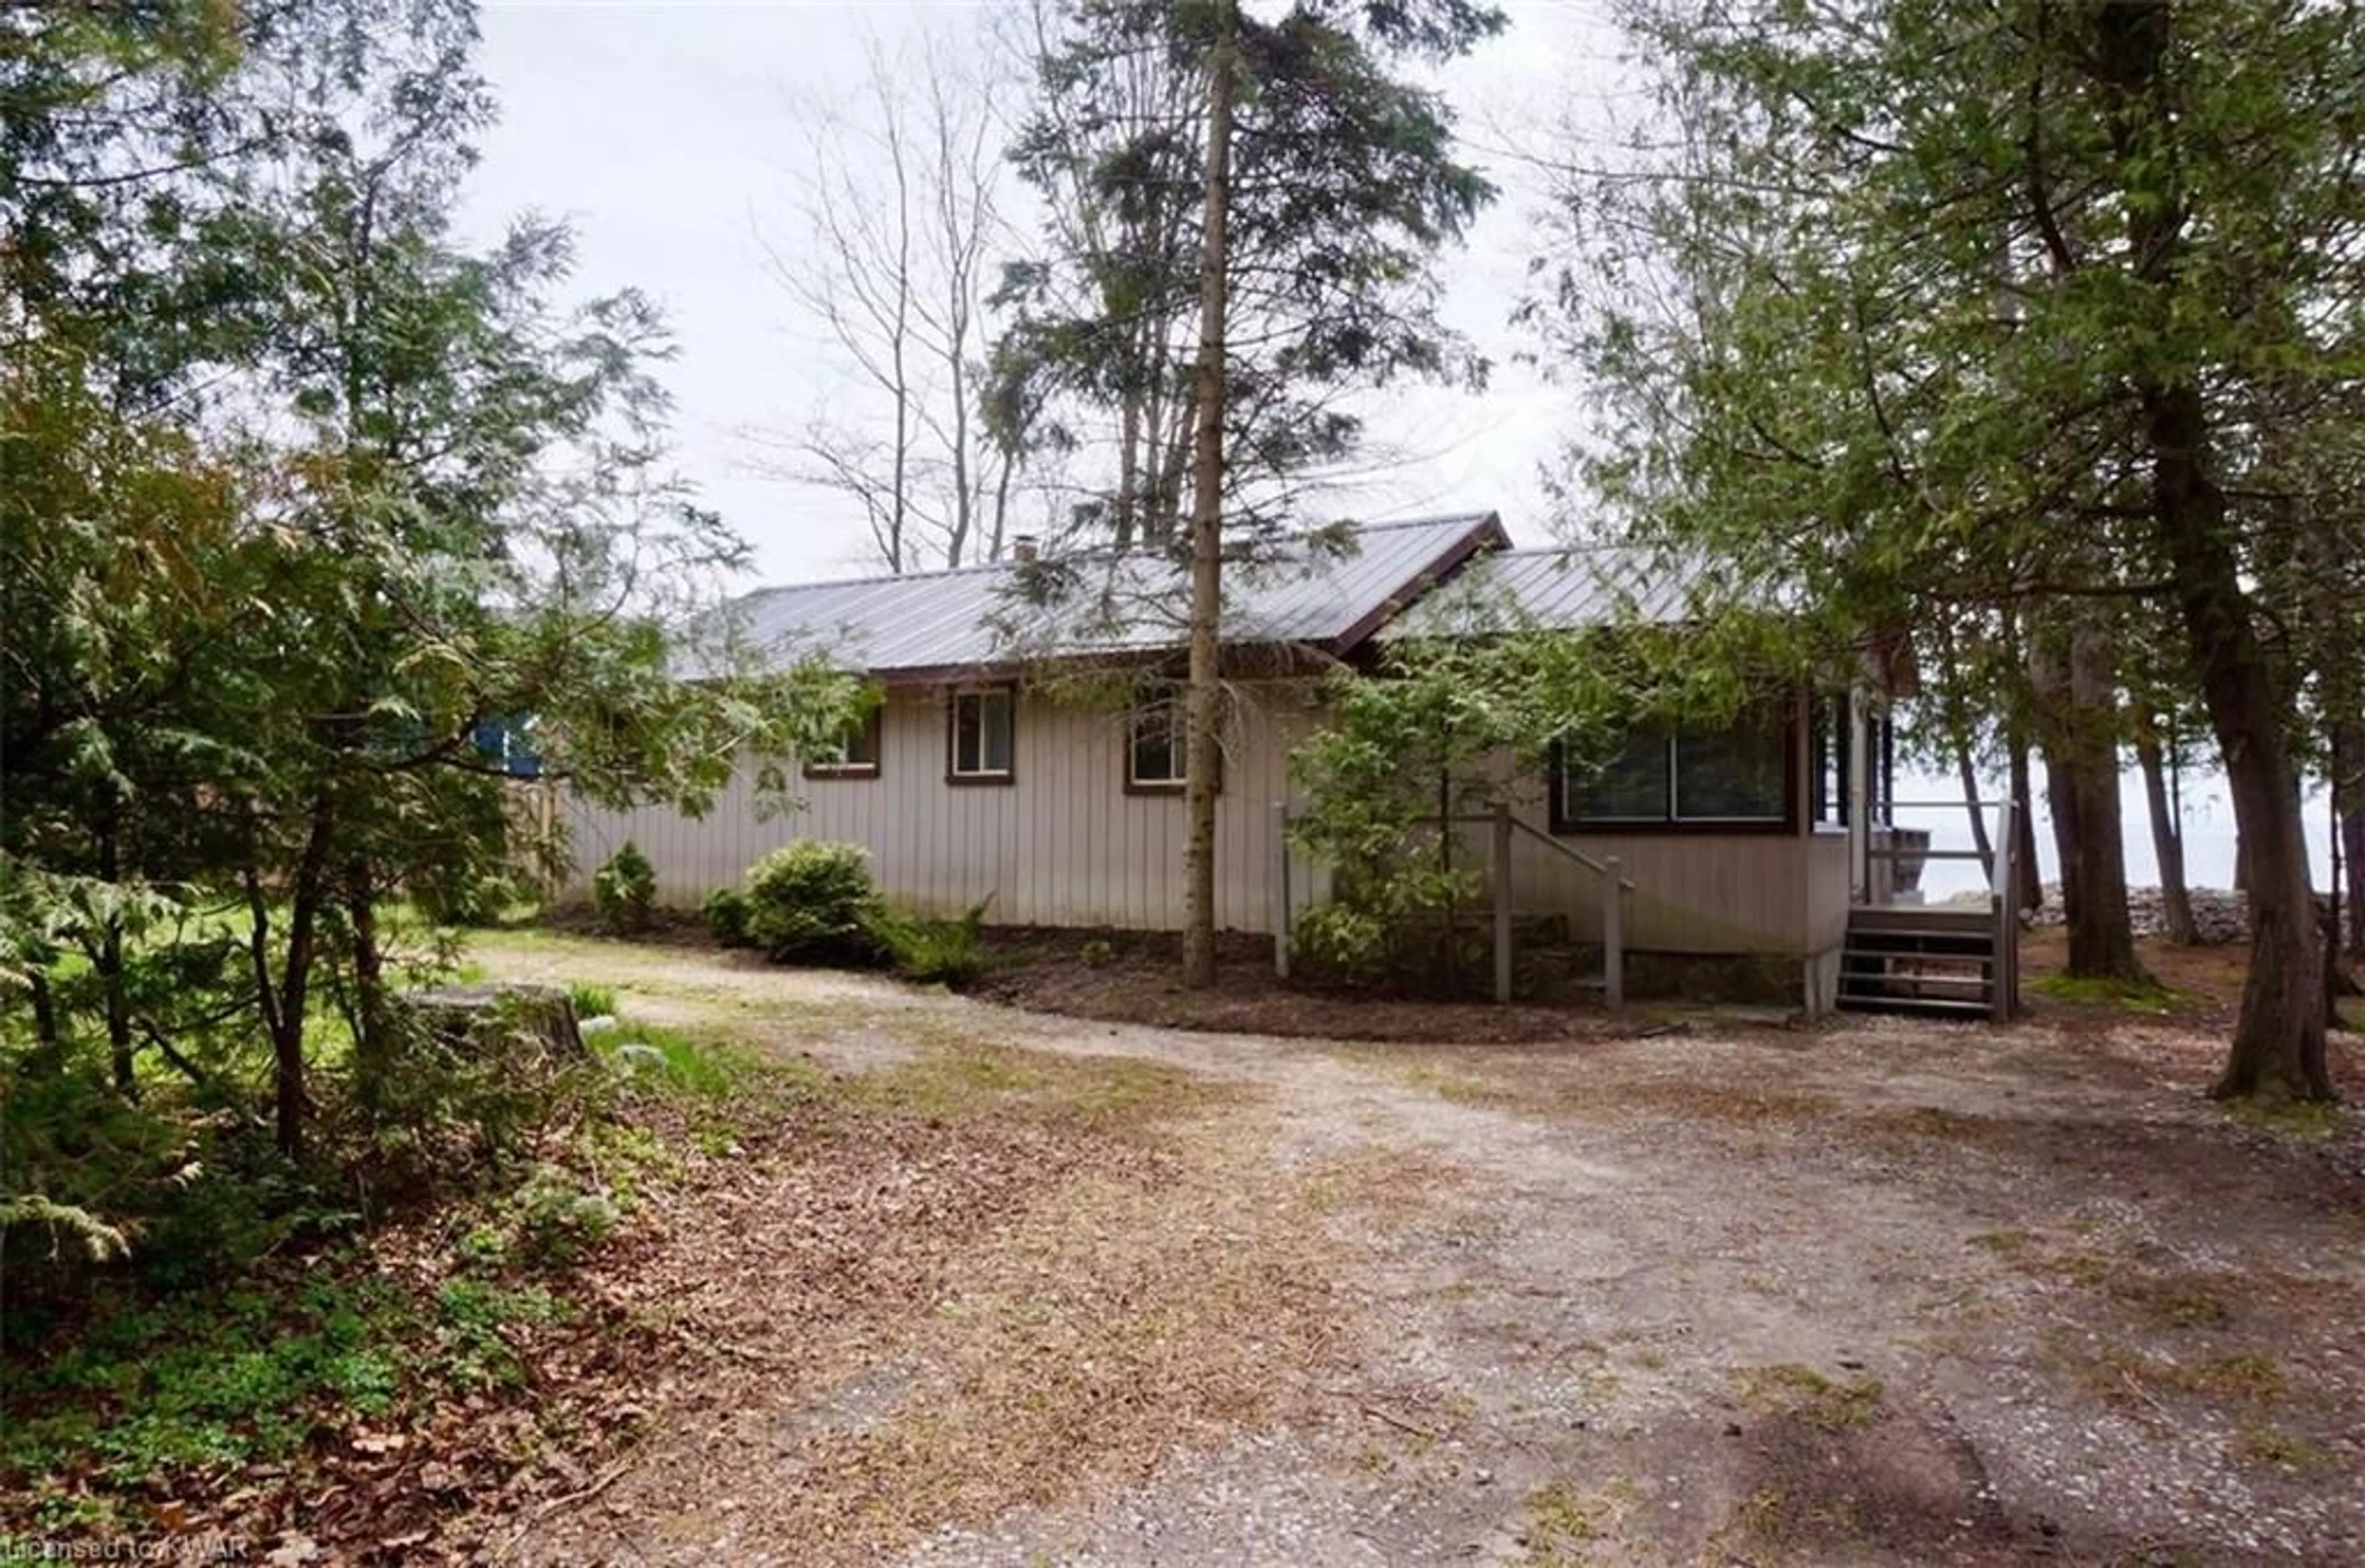 Cottage for 1536 Tiny Beaches Rd, Tiny Ontario L9M 1R3